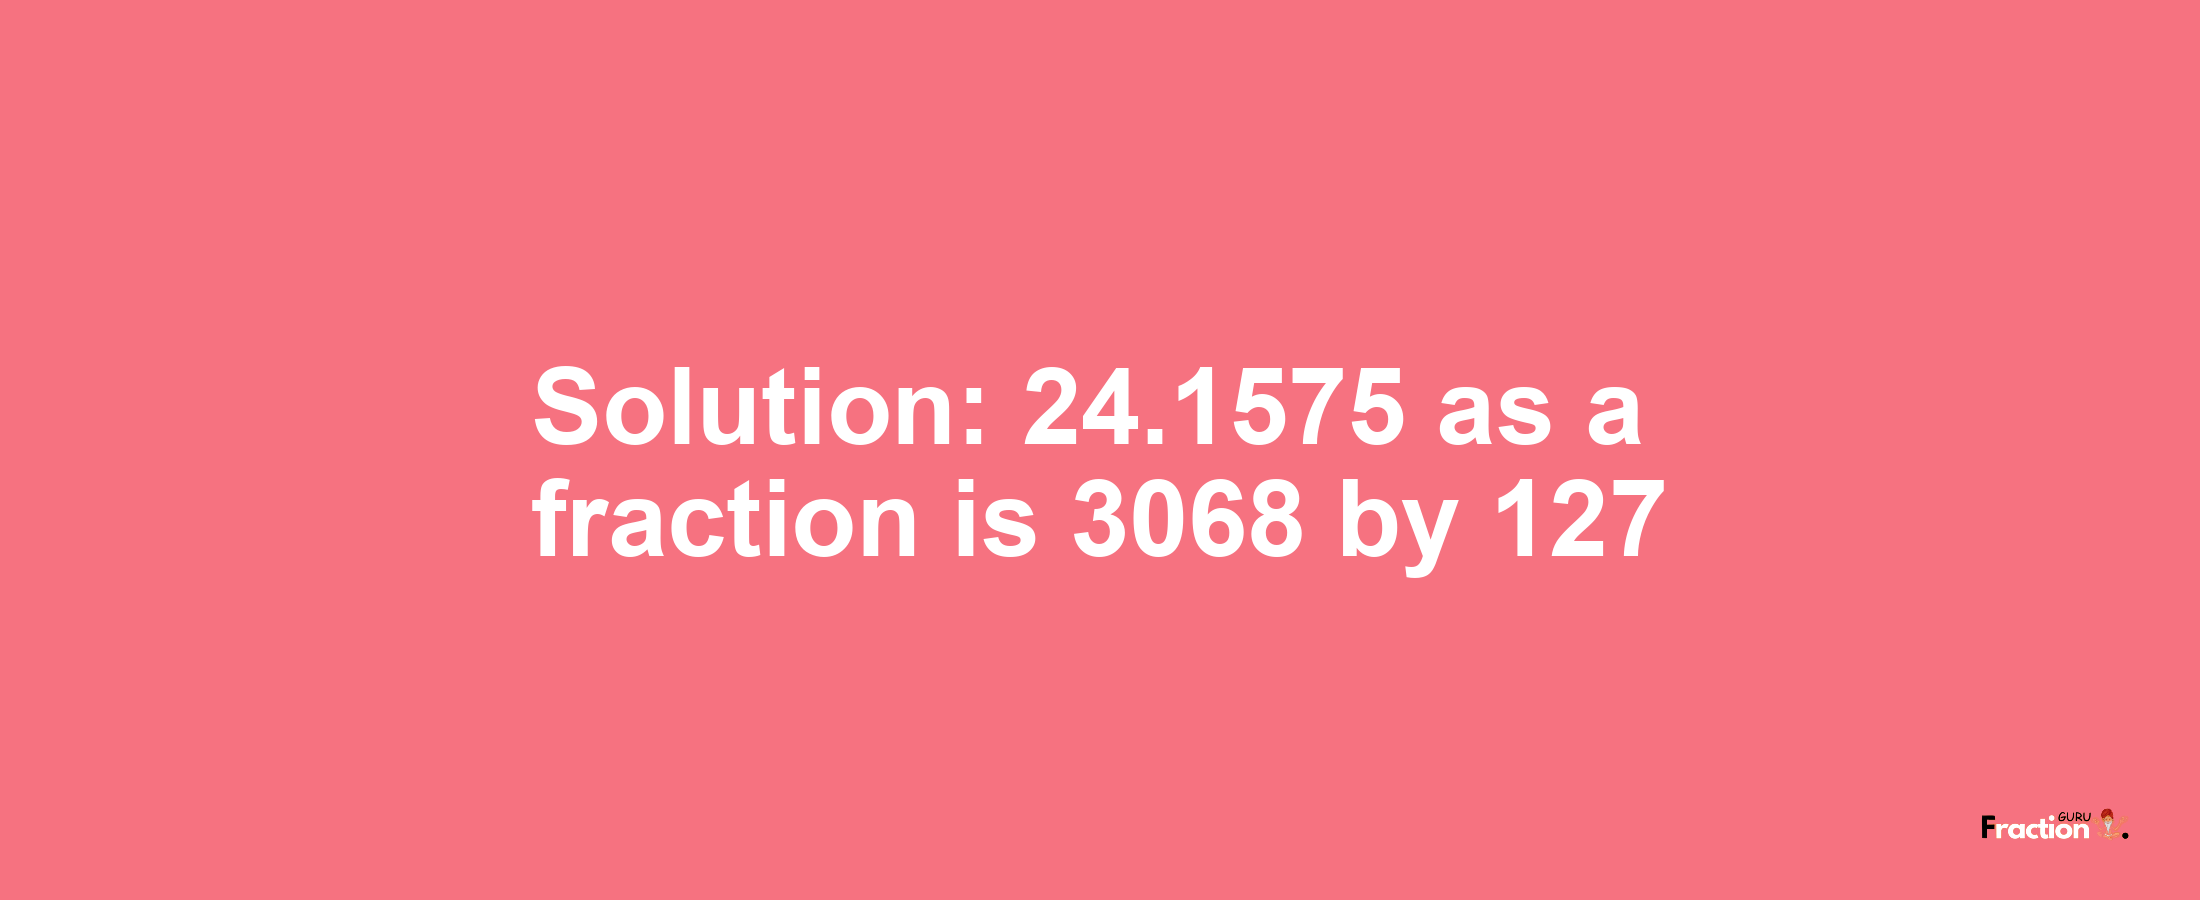 Solution:24.1575 as a fraction is 3068/127